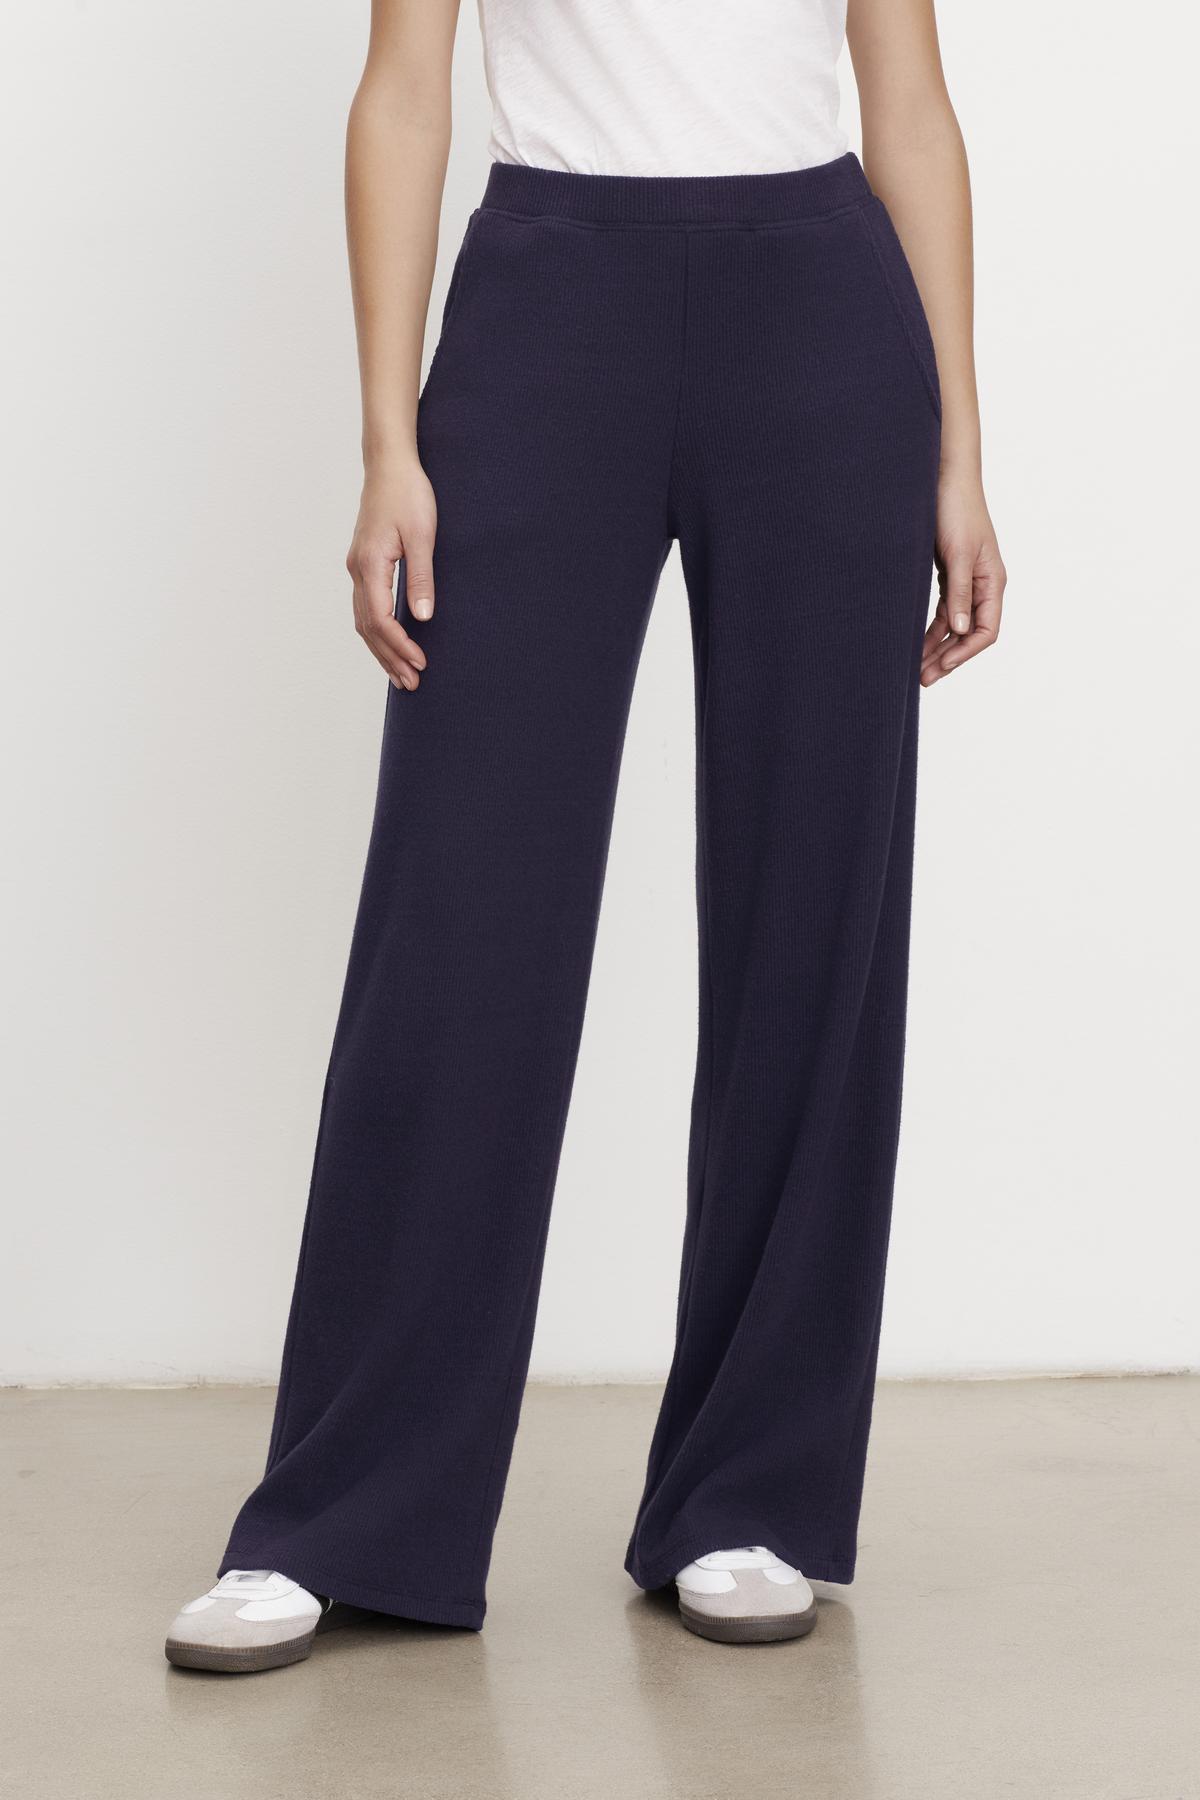 A woman wearing Velvet by Graham & Spencer's KACIE BRUSHED RIB PANT and white t-shirt.-35701975449793